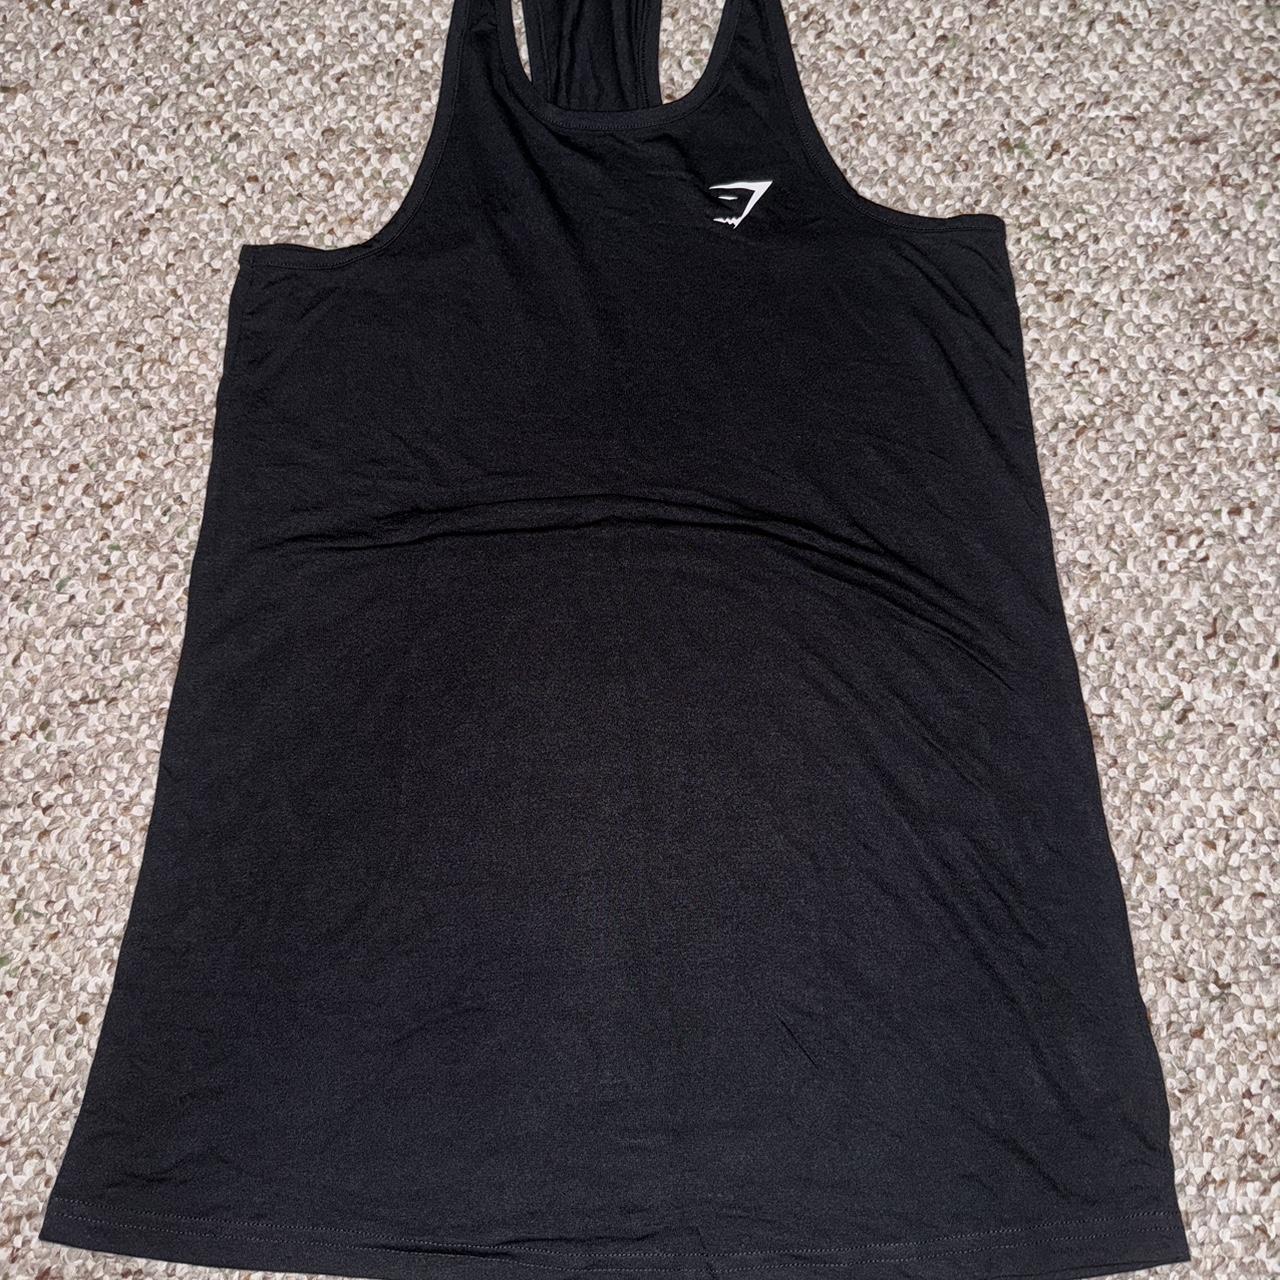 Black tank top from Gymshark Size XS New never worn... - Depop